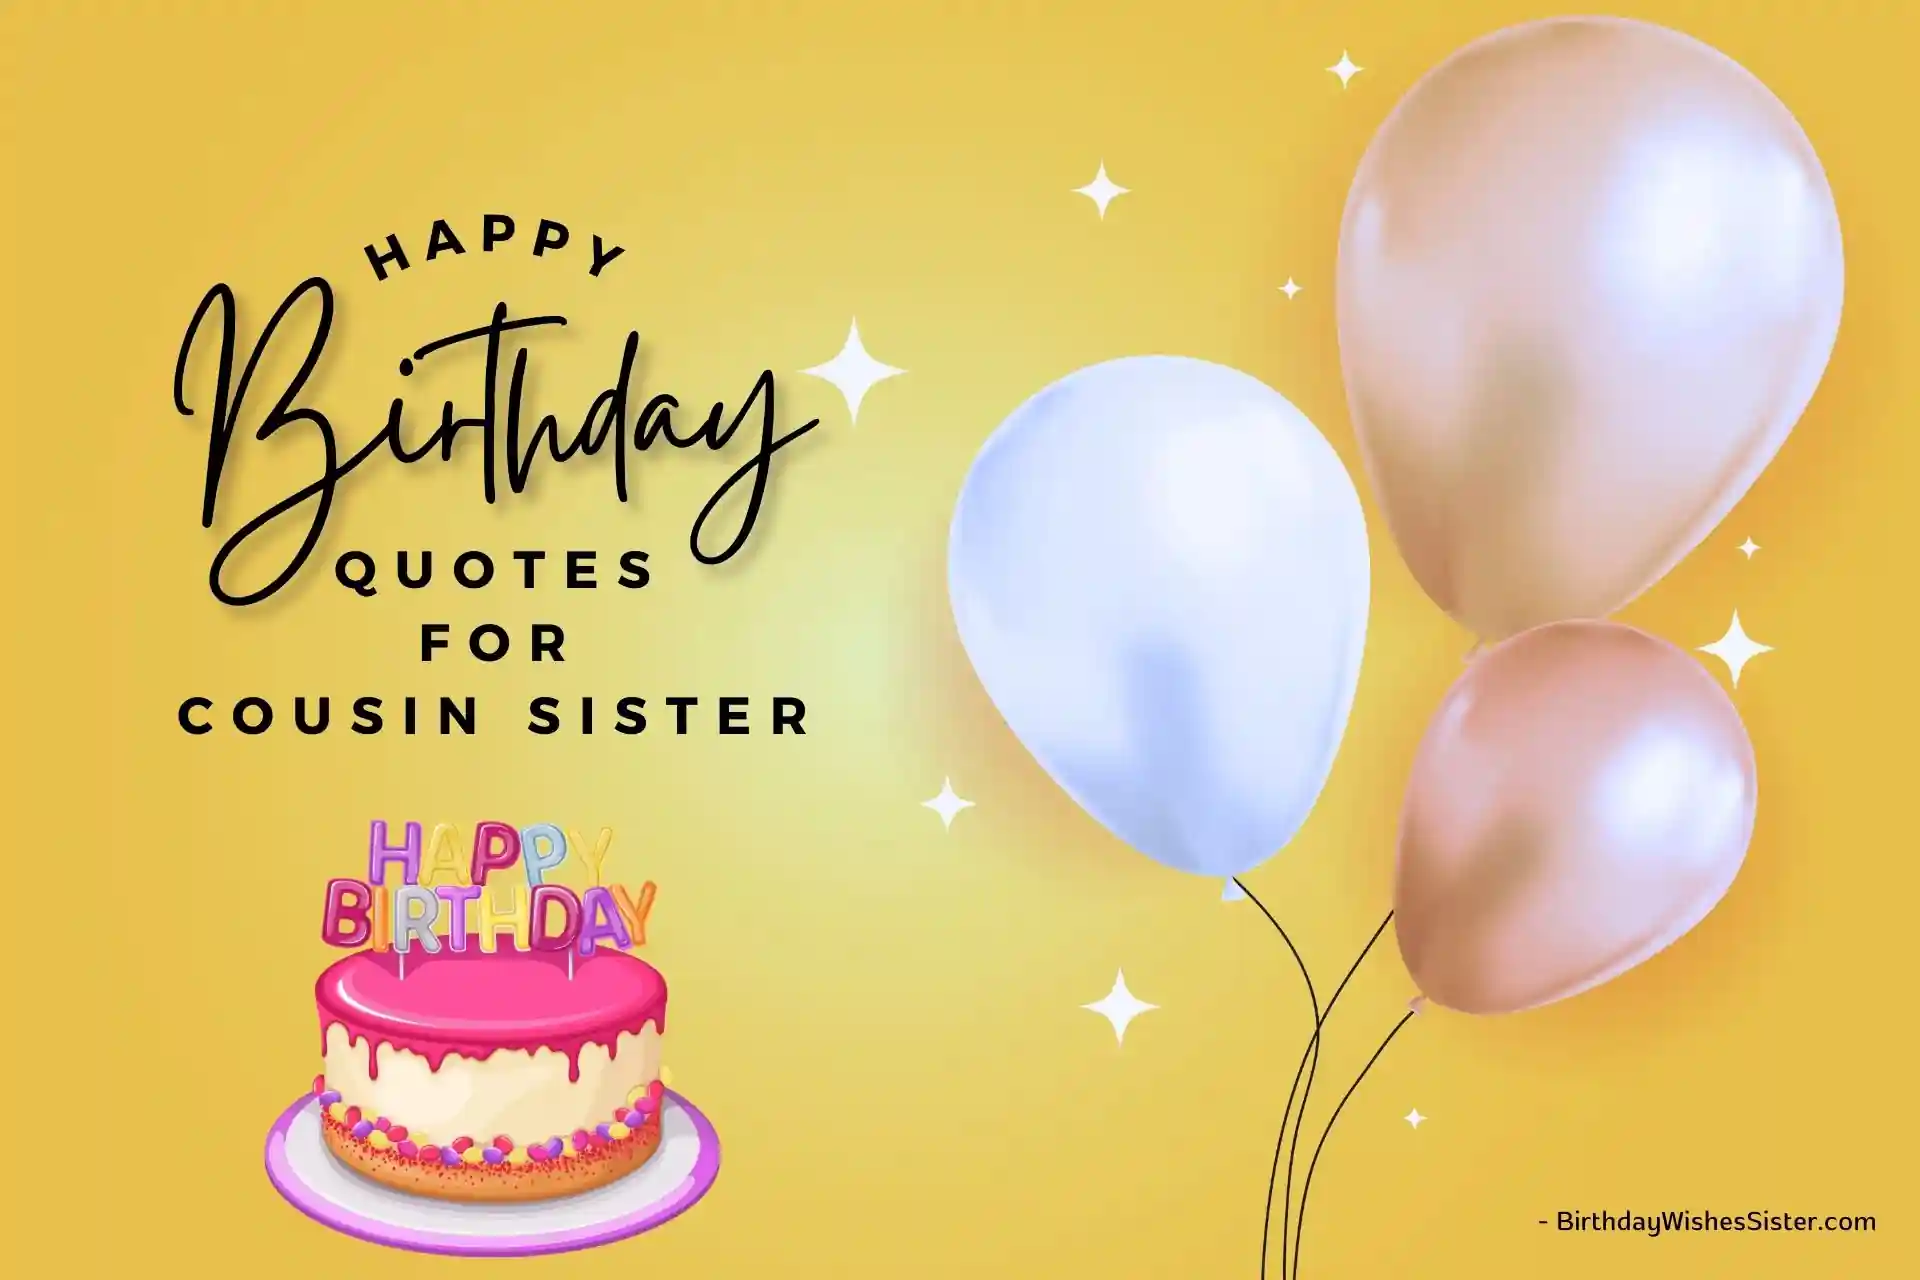 Happy Birthday Quotes For Cousin Sister, Happy Birthday Quotes For Sister